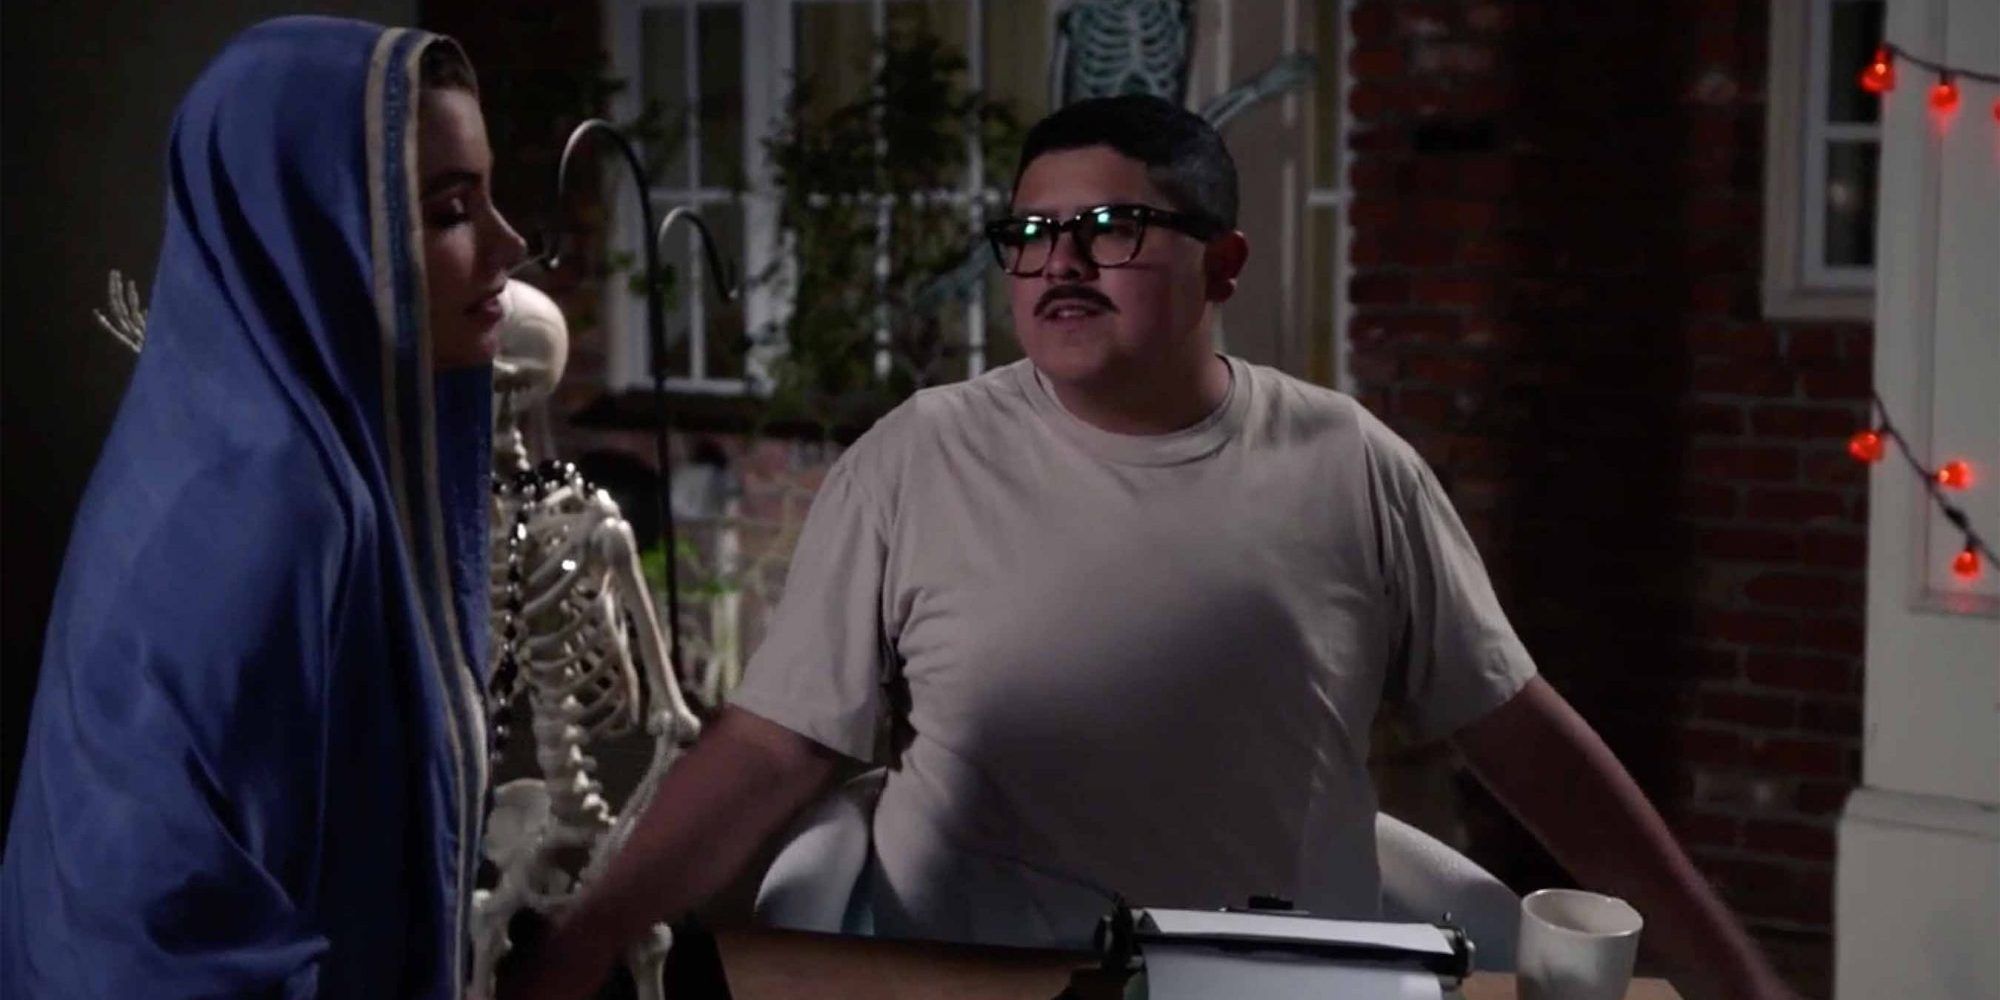 Manny in Halloween costume Modern Family 